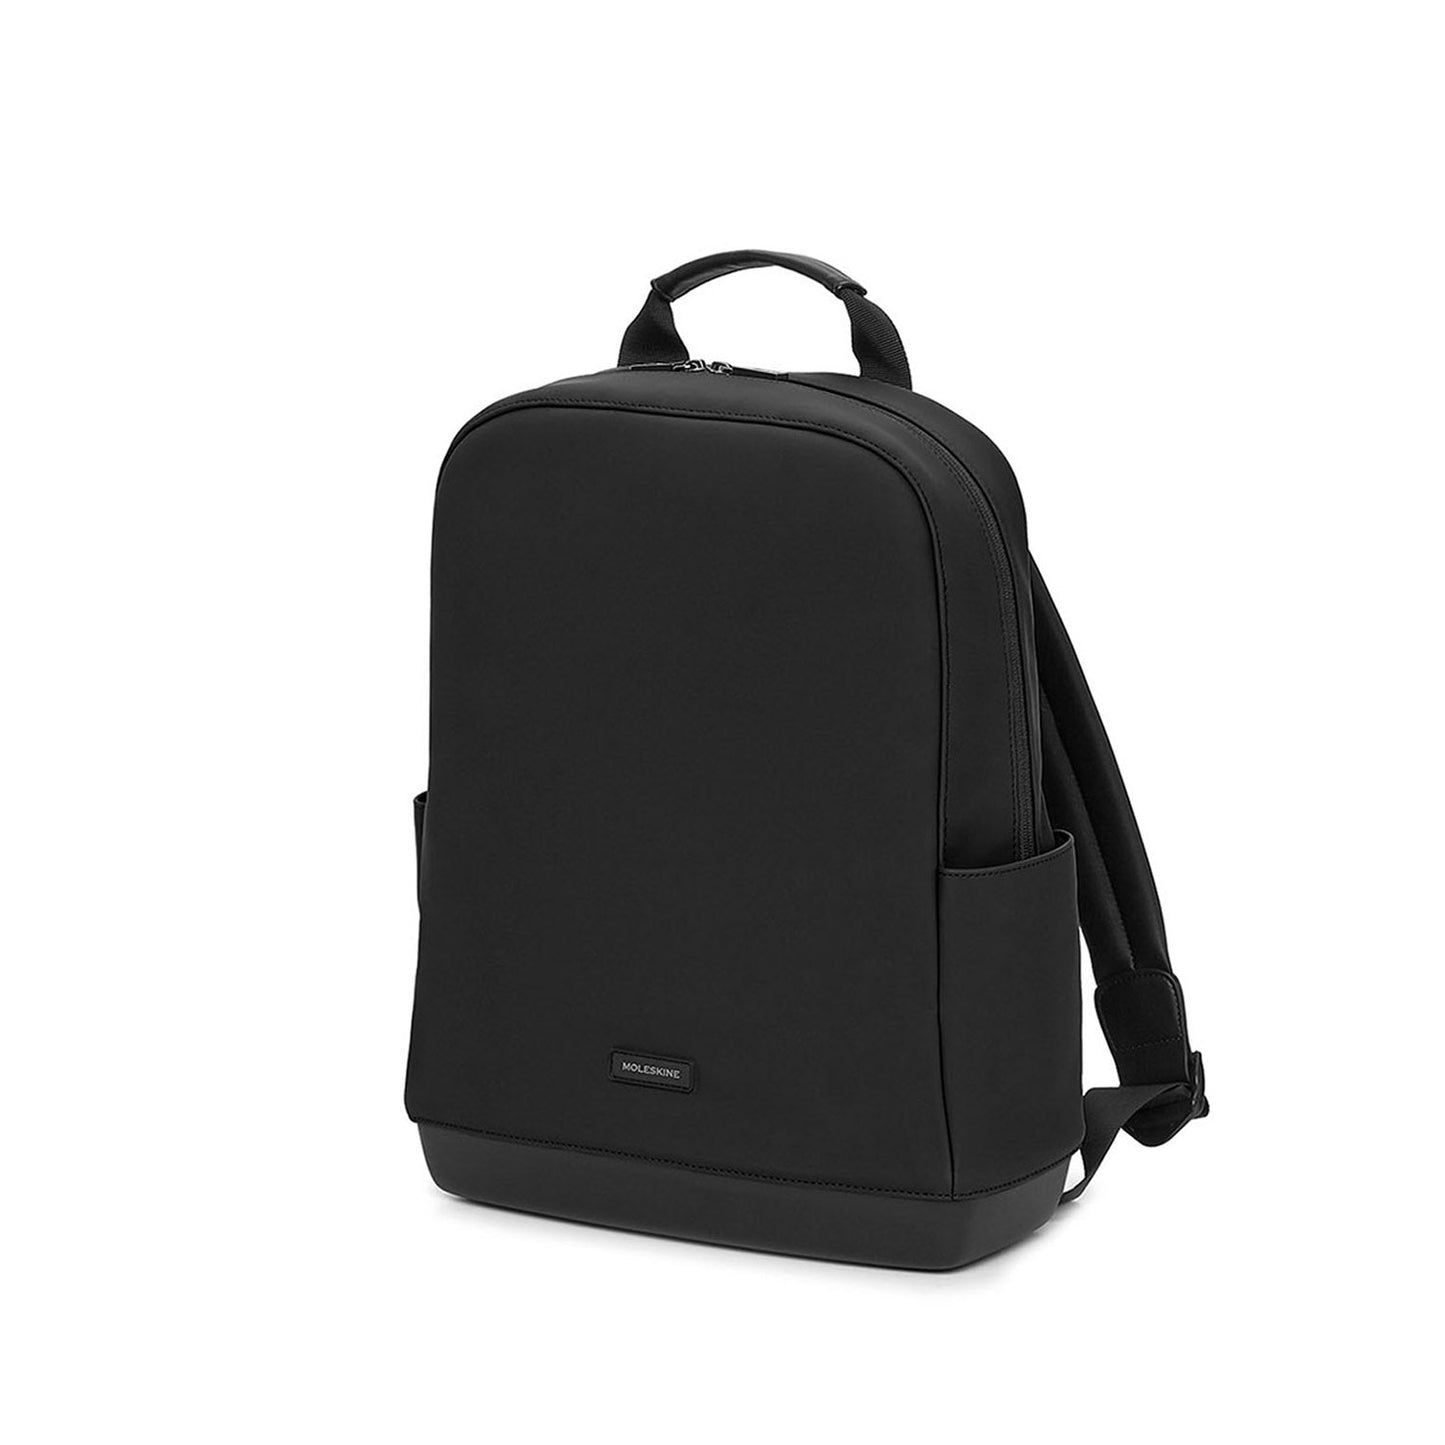 The Backpack Collection Soft Touch Black